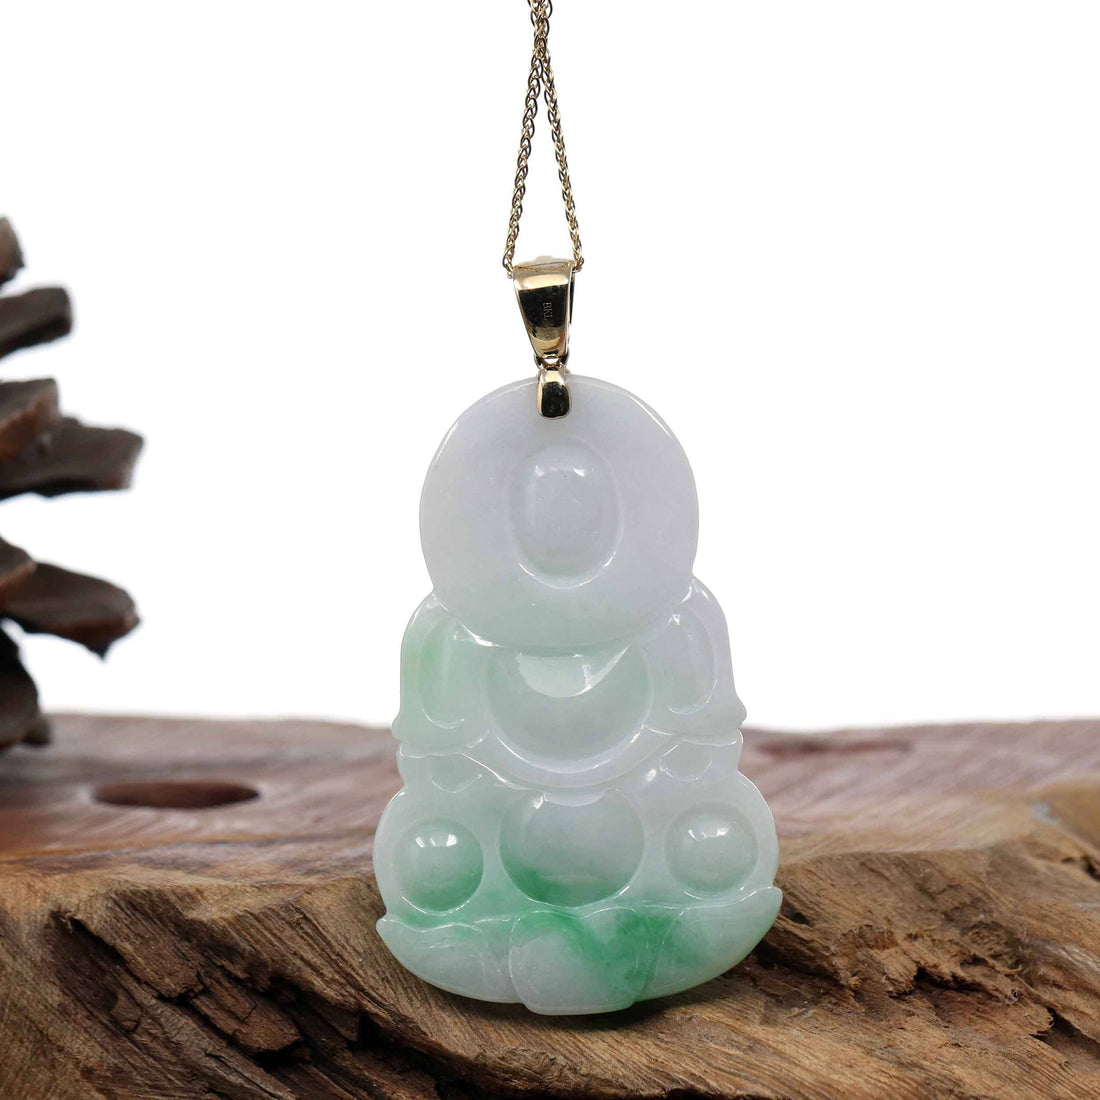 Baikalla Jewelry Jade Guanyin Pendant Necklace Copy of Copy of "Goddess of Compassion" 14k Yellow Gold Genuine Burmese Jadeite Jade Guanyin Necklace With Good Luck Design